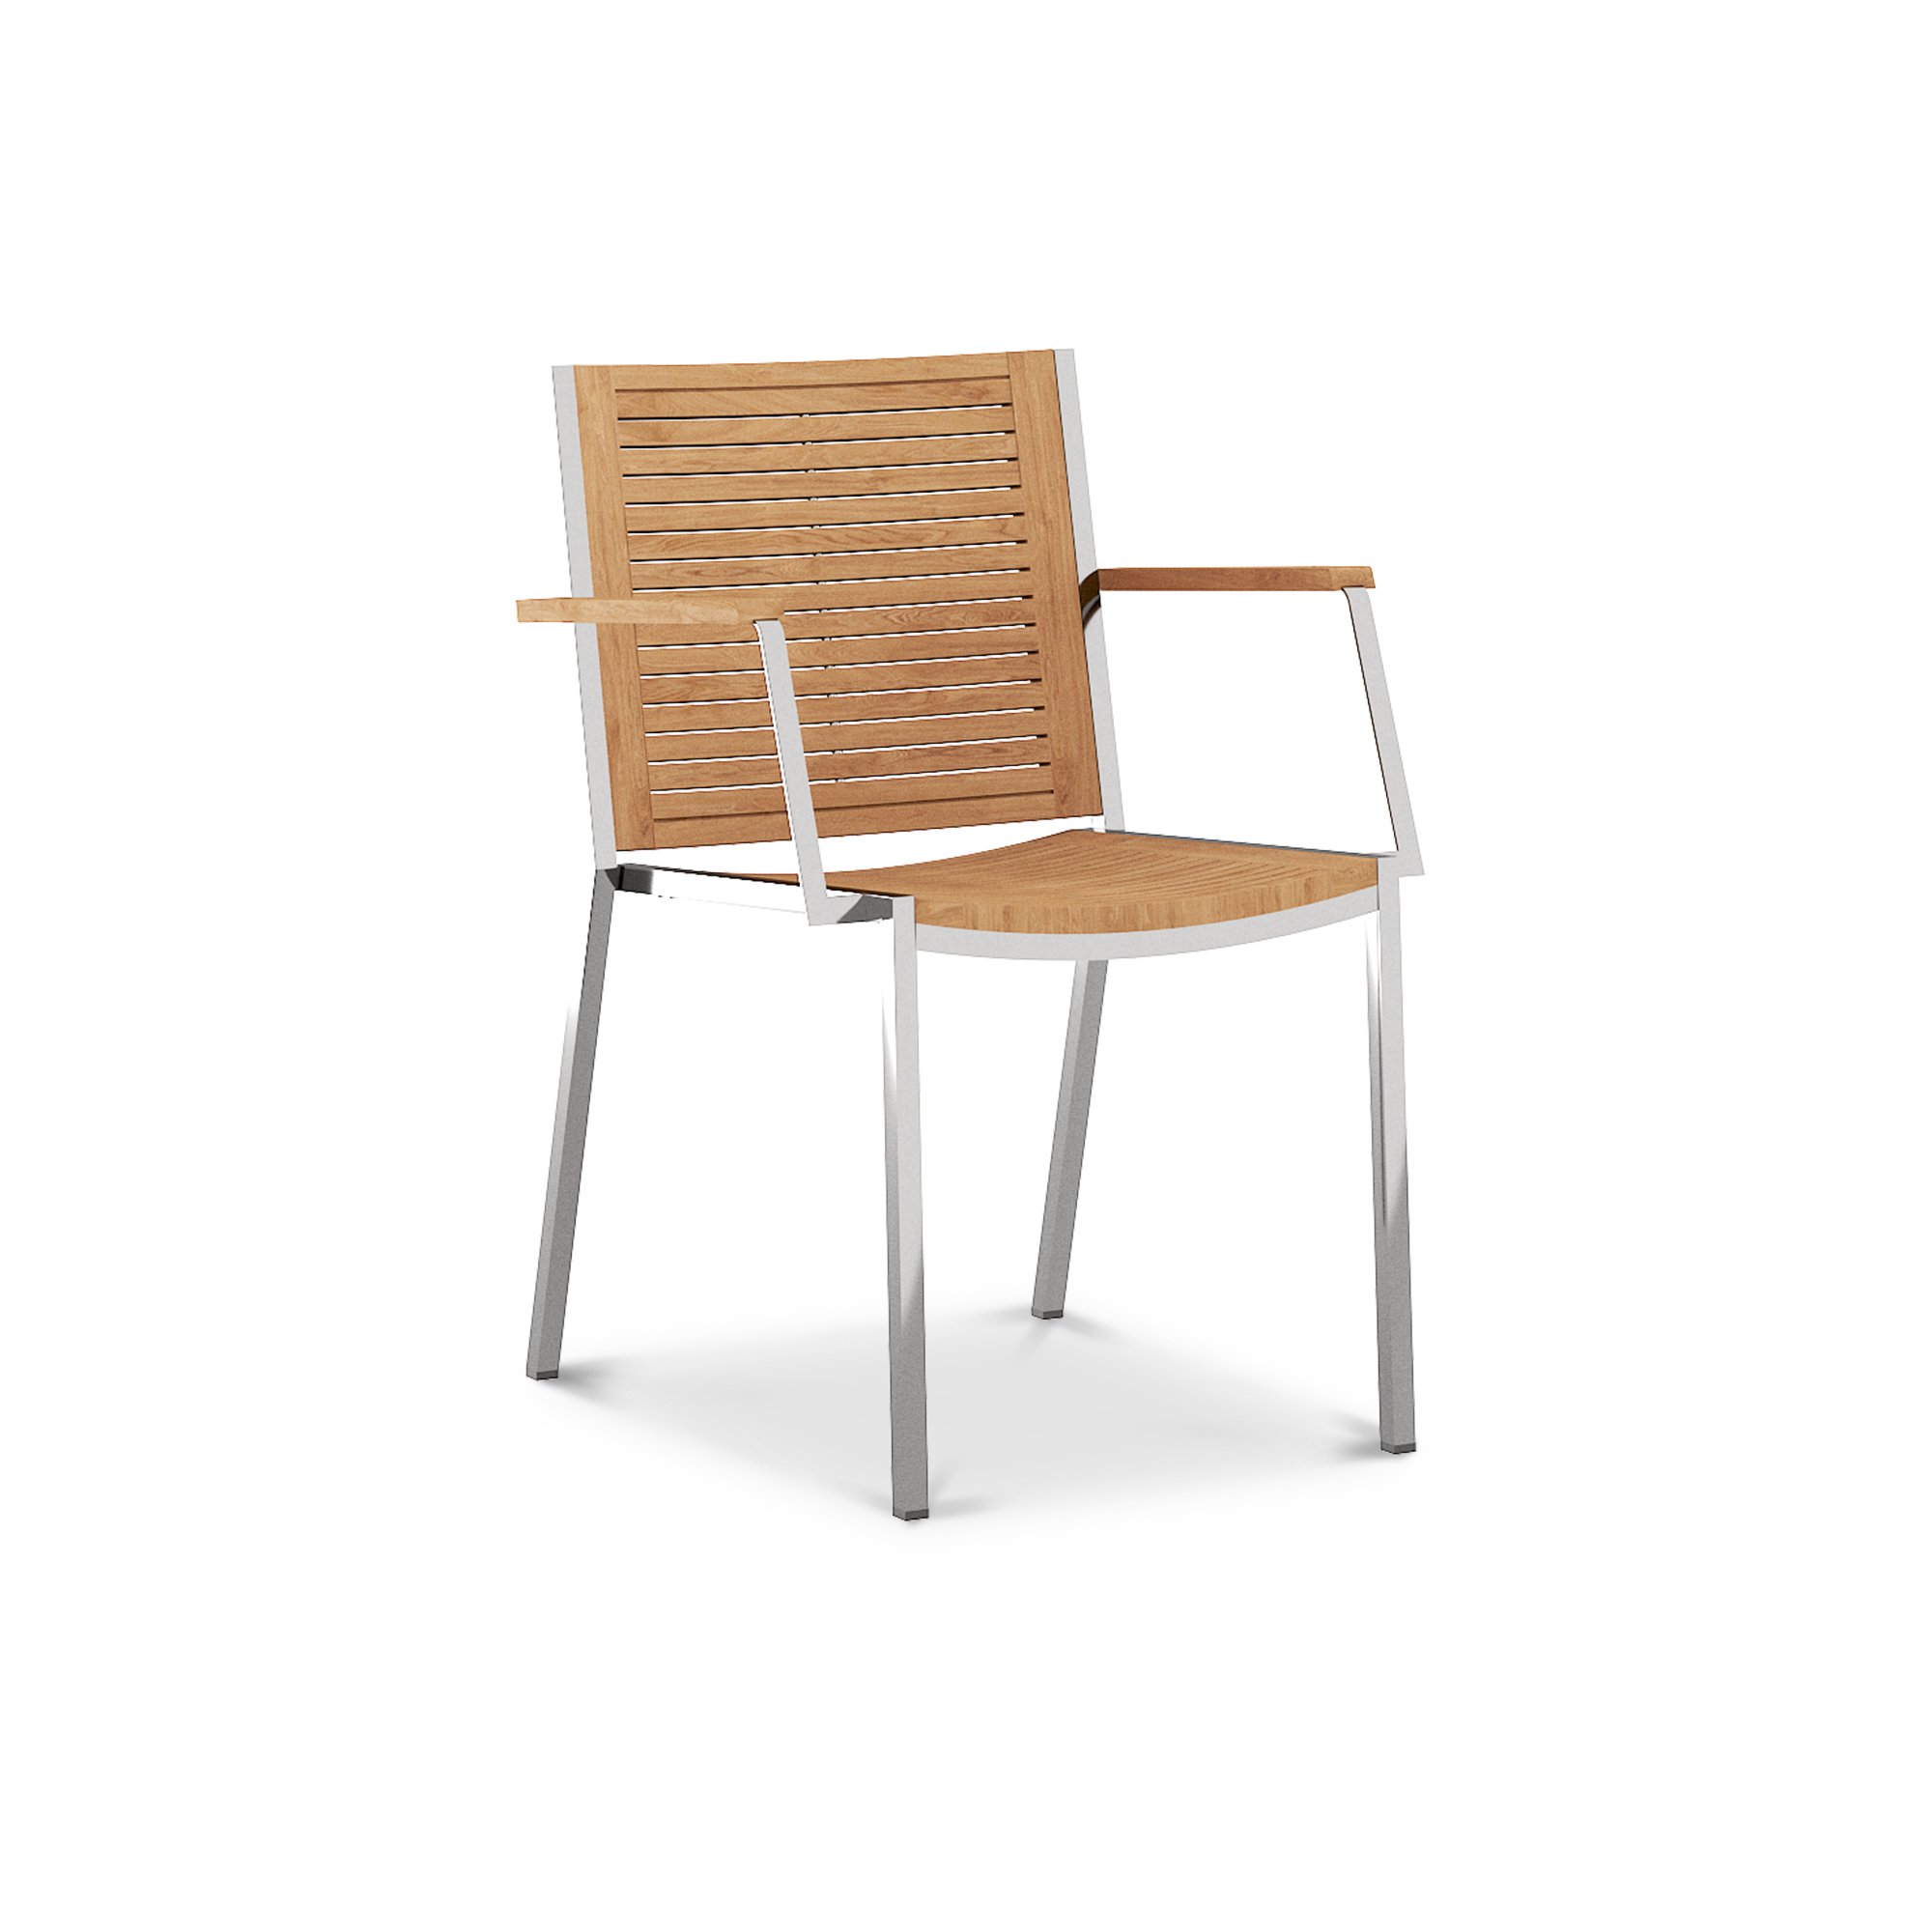 The Supreme™ Stacking Teak & Stainless Steel Arm Chair.